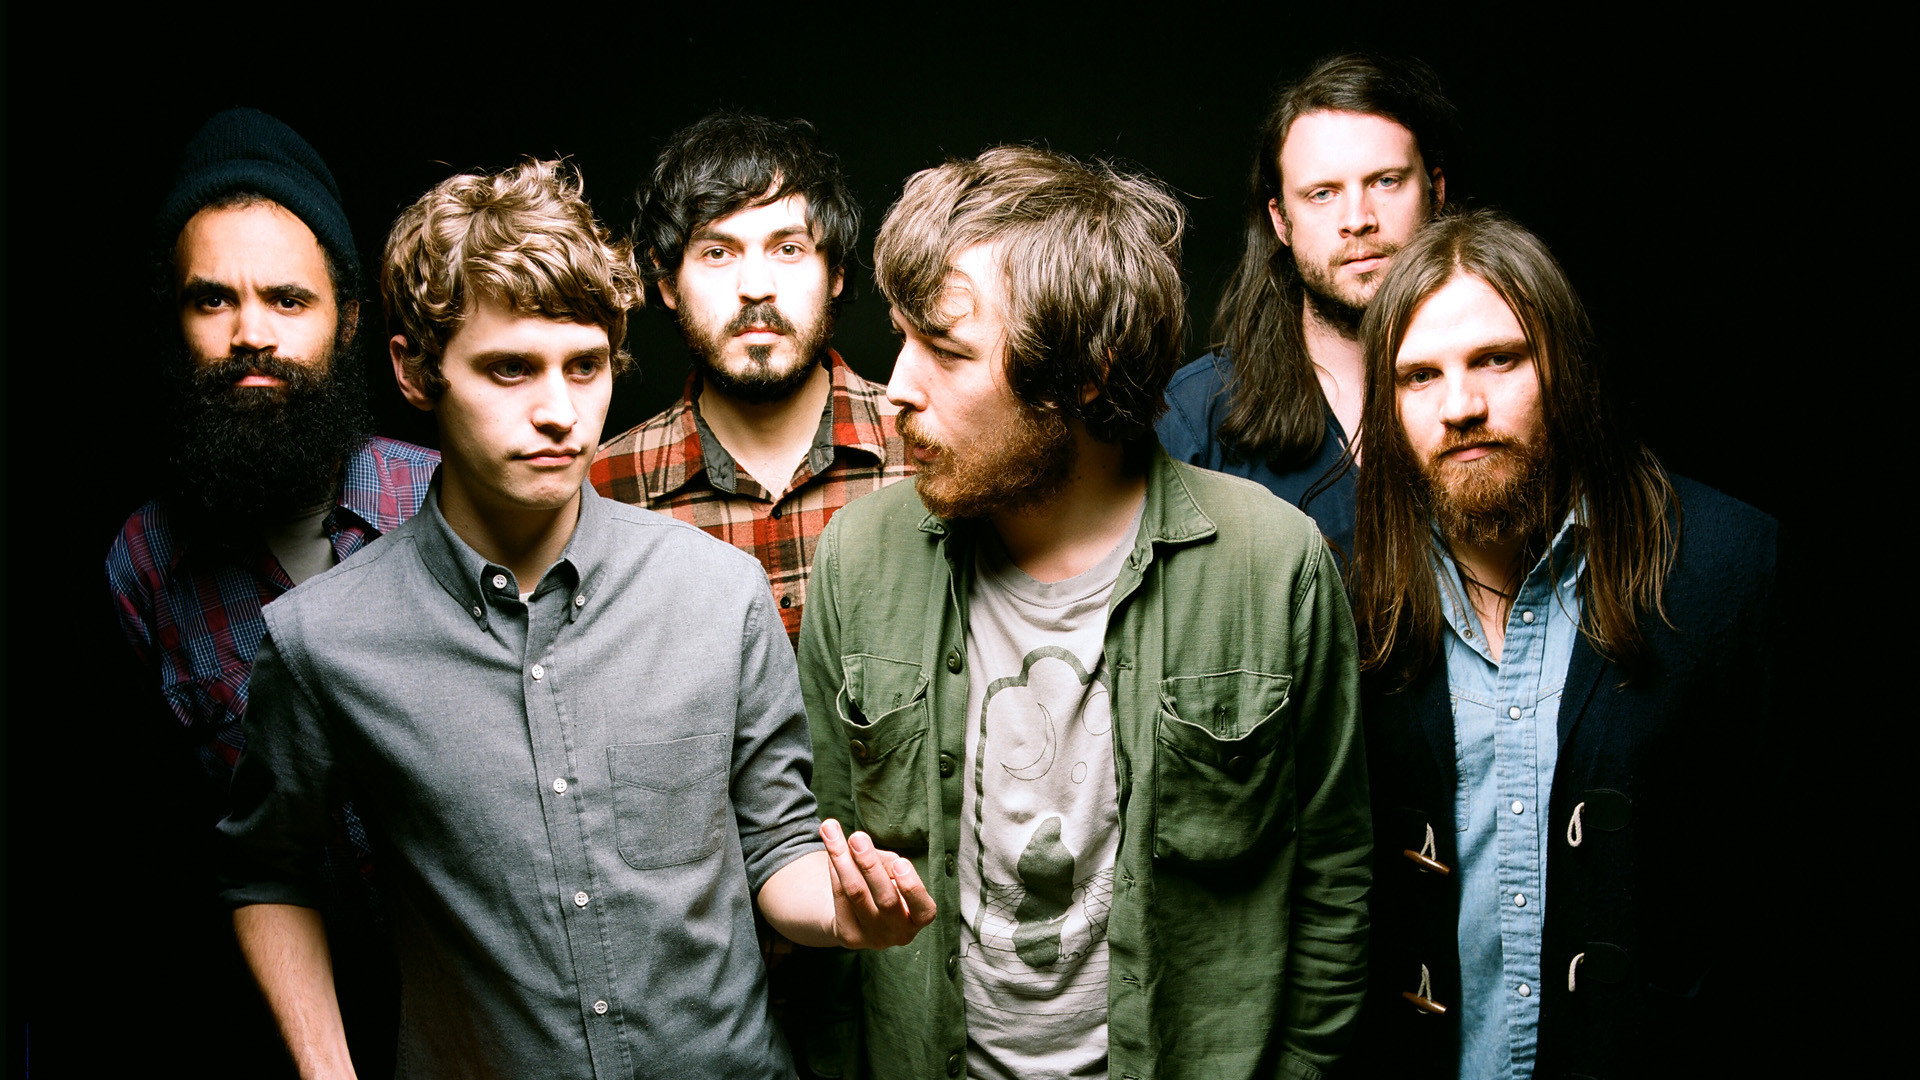 If You Need To, Keep Time On Me av Fleet Foxes